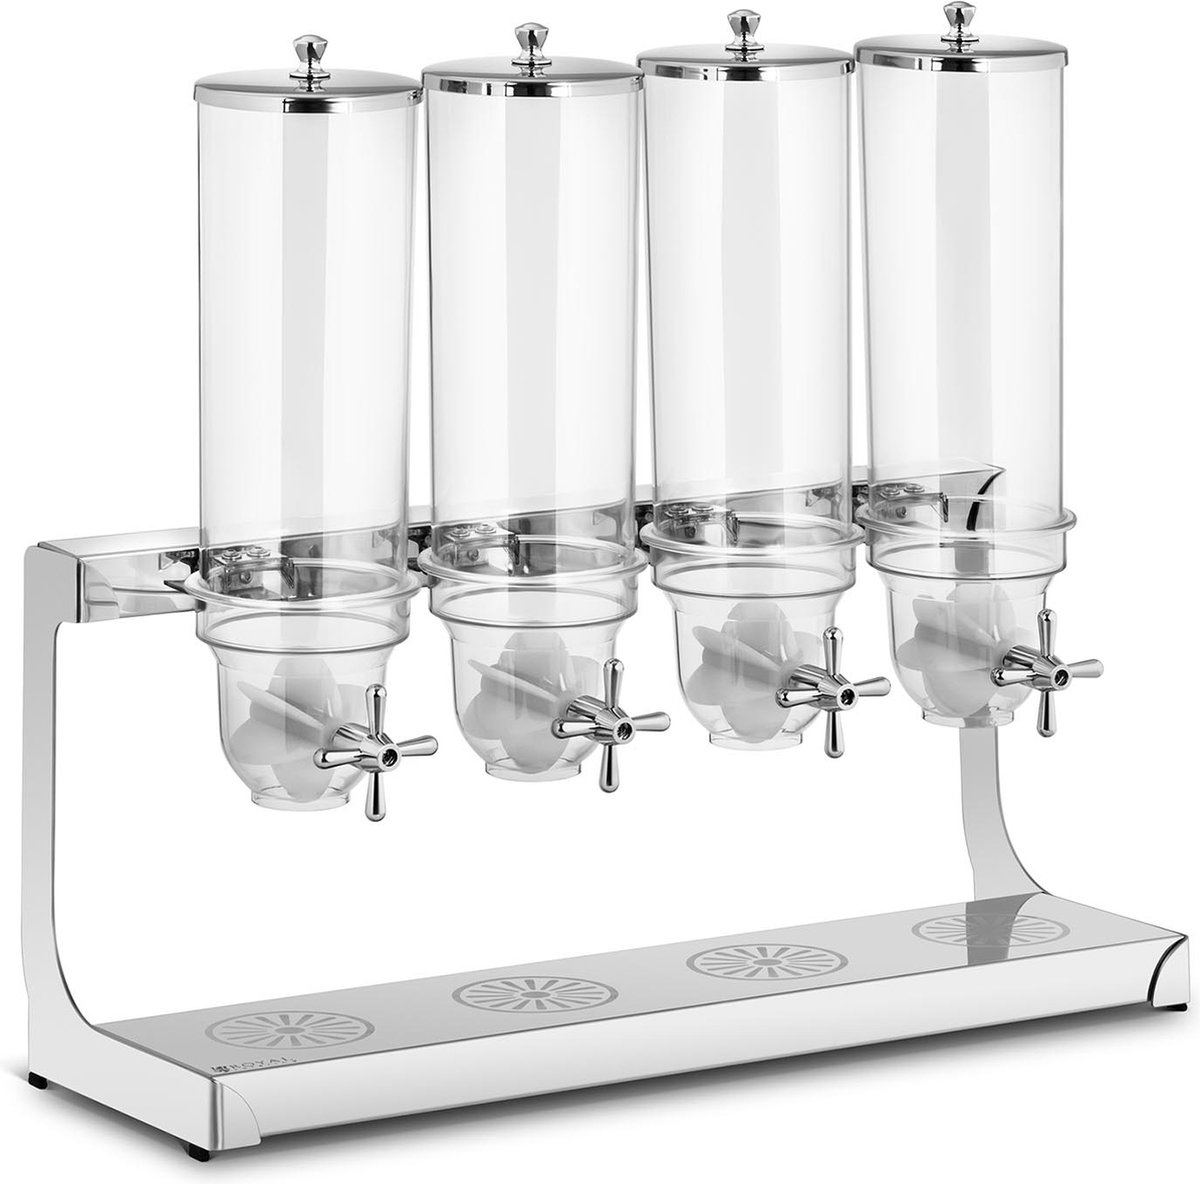 Royal Catering Granen Dispenser - 4 x 3.5 L - 4 containers